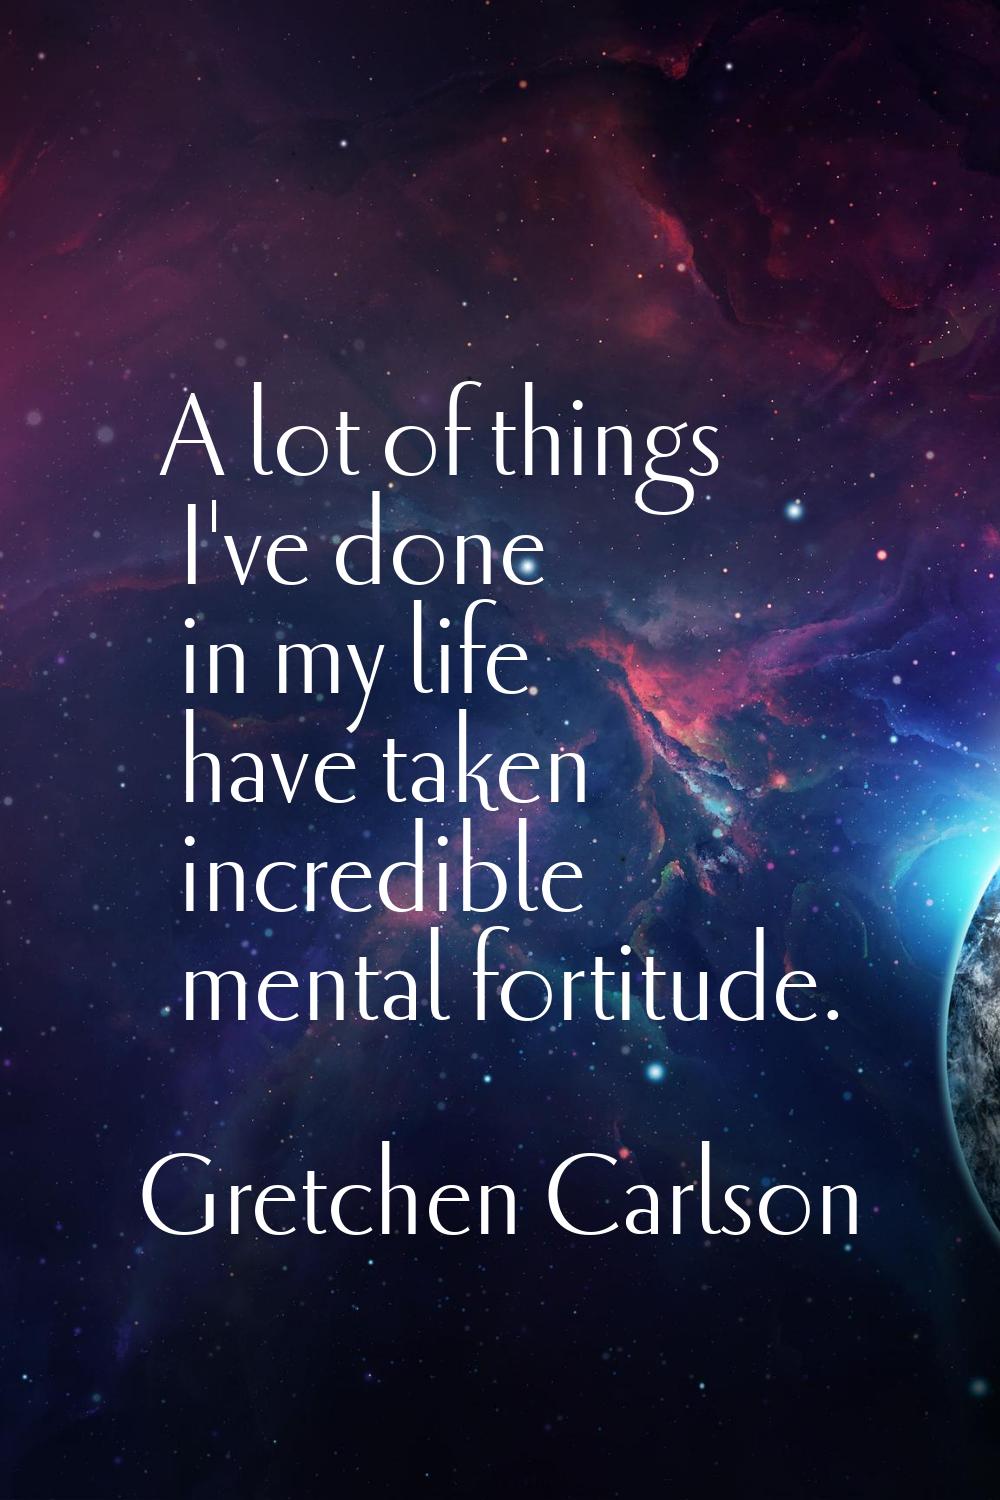 A lot of things I've done in my life have taken incredible mental fortitude.